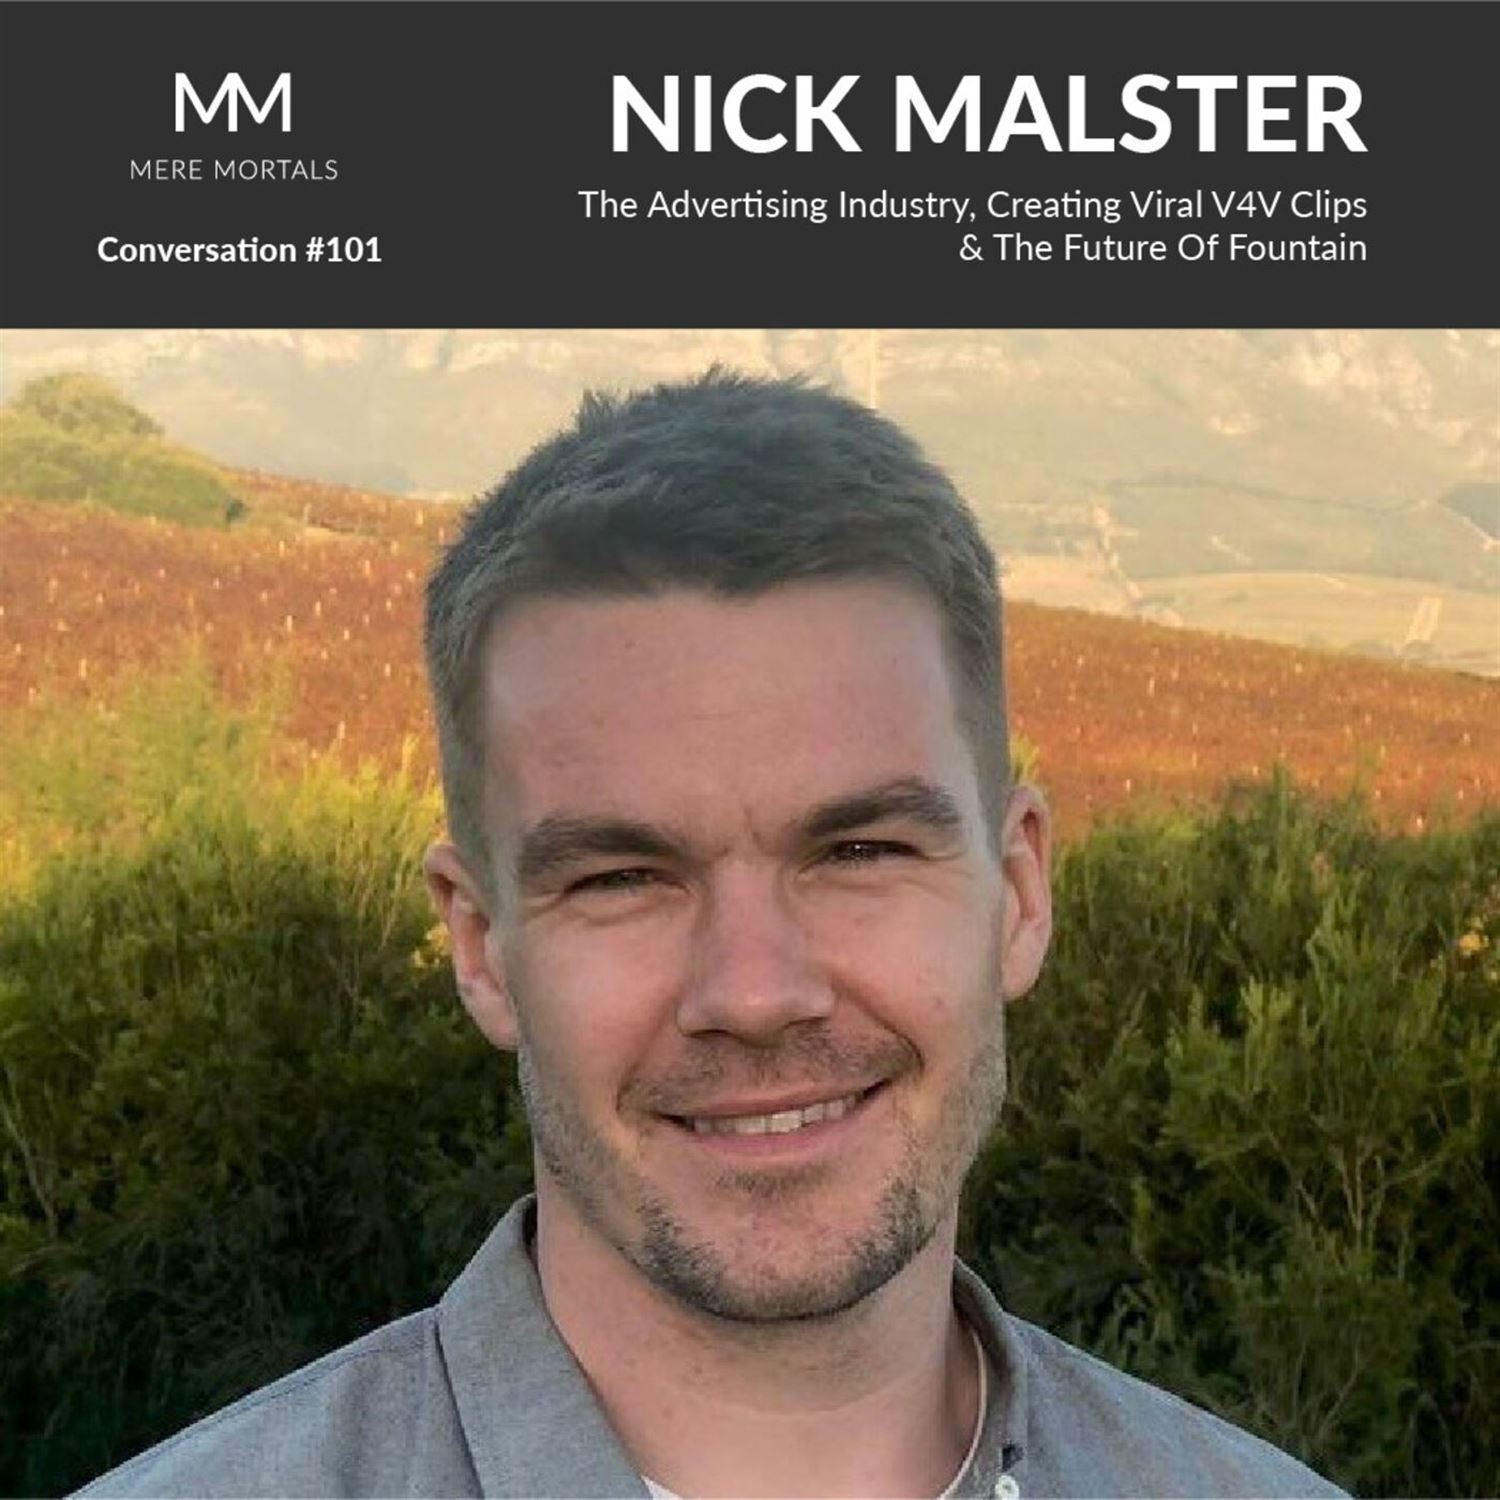 NICK MALSTER | The Advertising Industry, Creating Viral V4V Clips & The Future Of Fountain